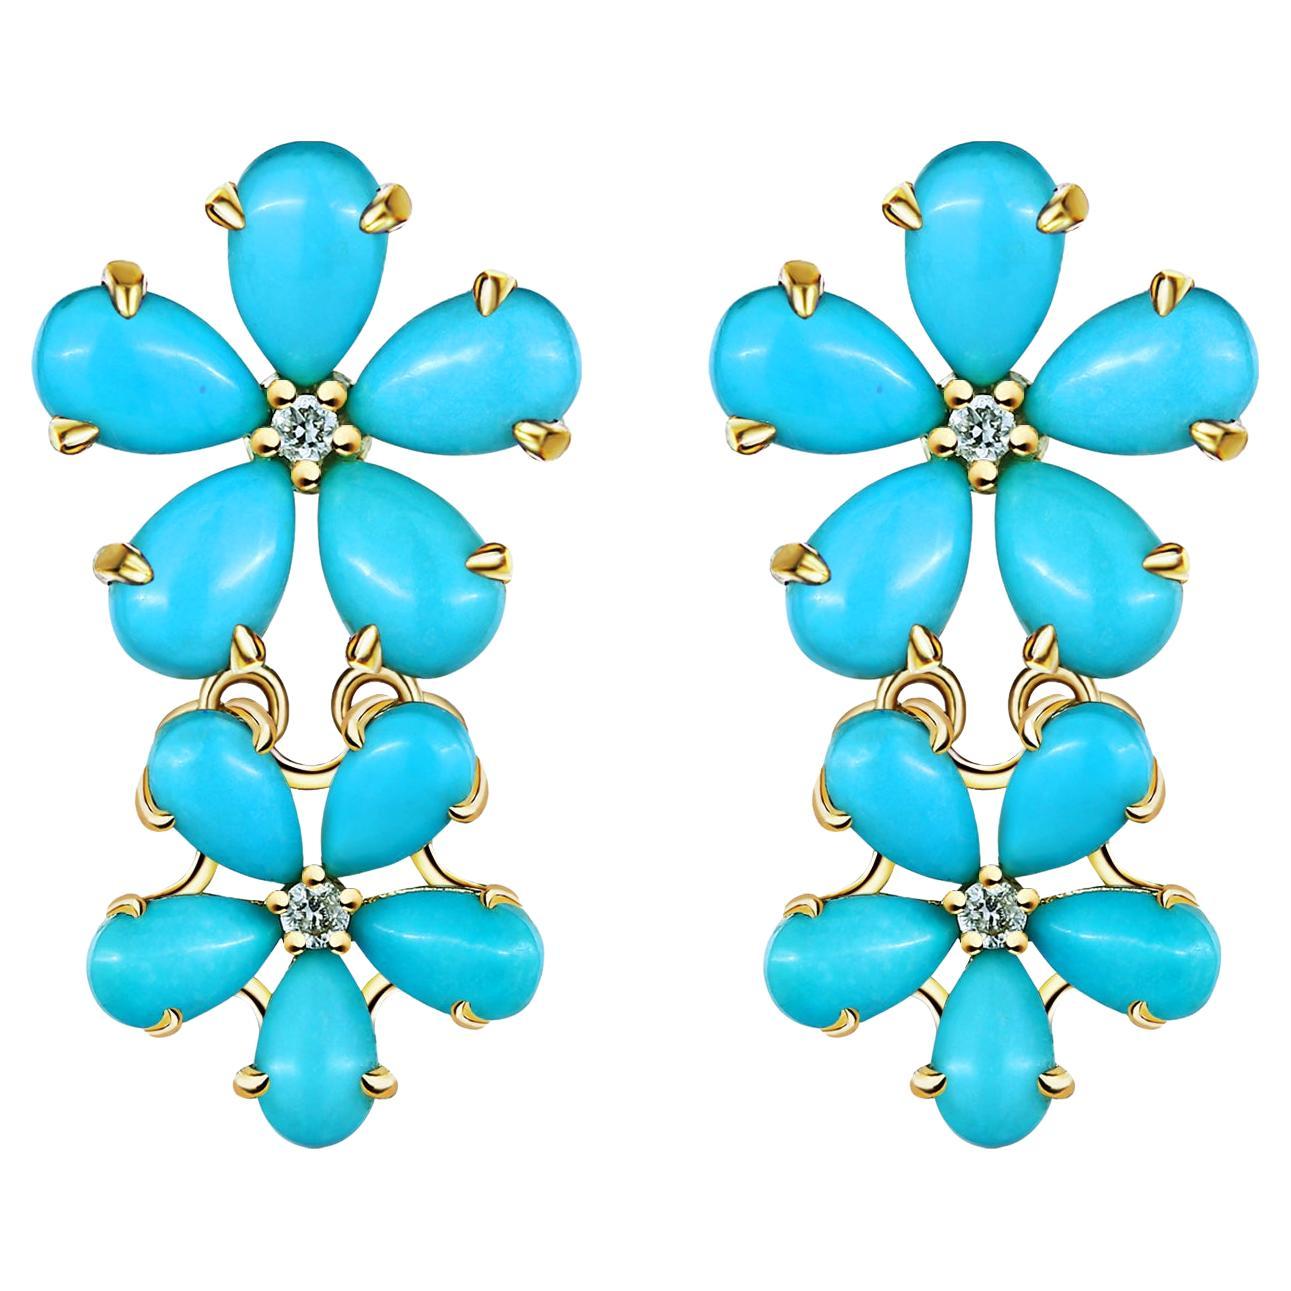 Nina Zhou Turquoise Diamond Blossom and 12-13mm Pearl Convertible Drop Earrings For Sale 1